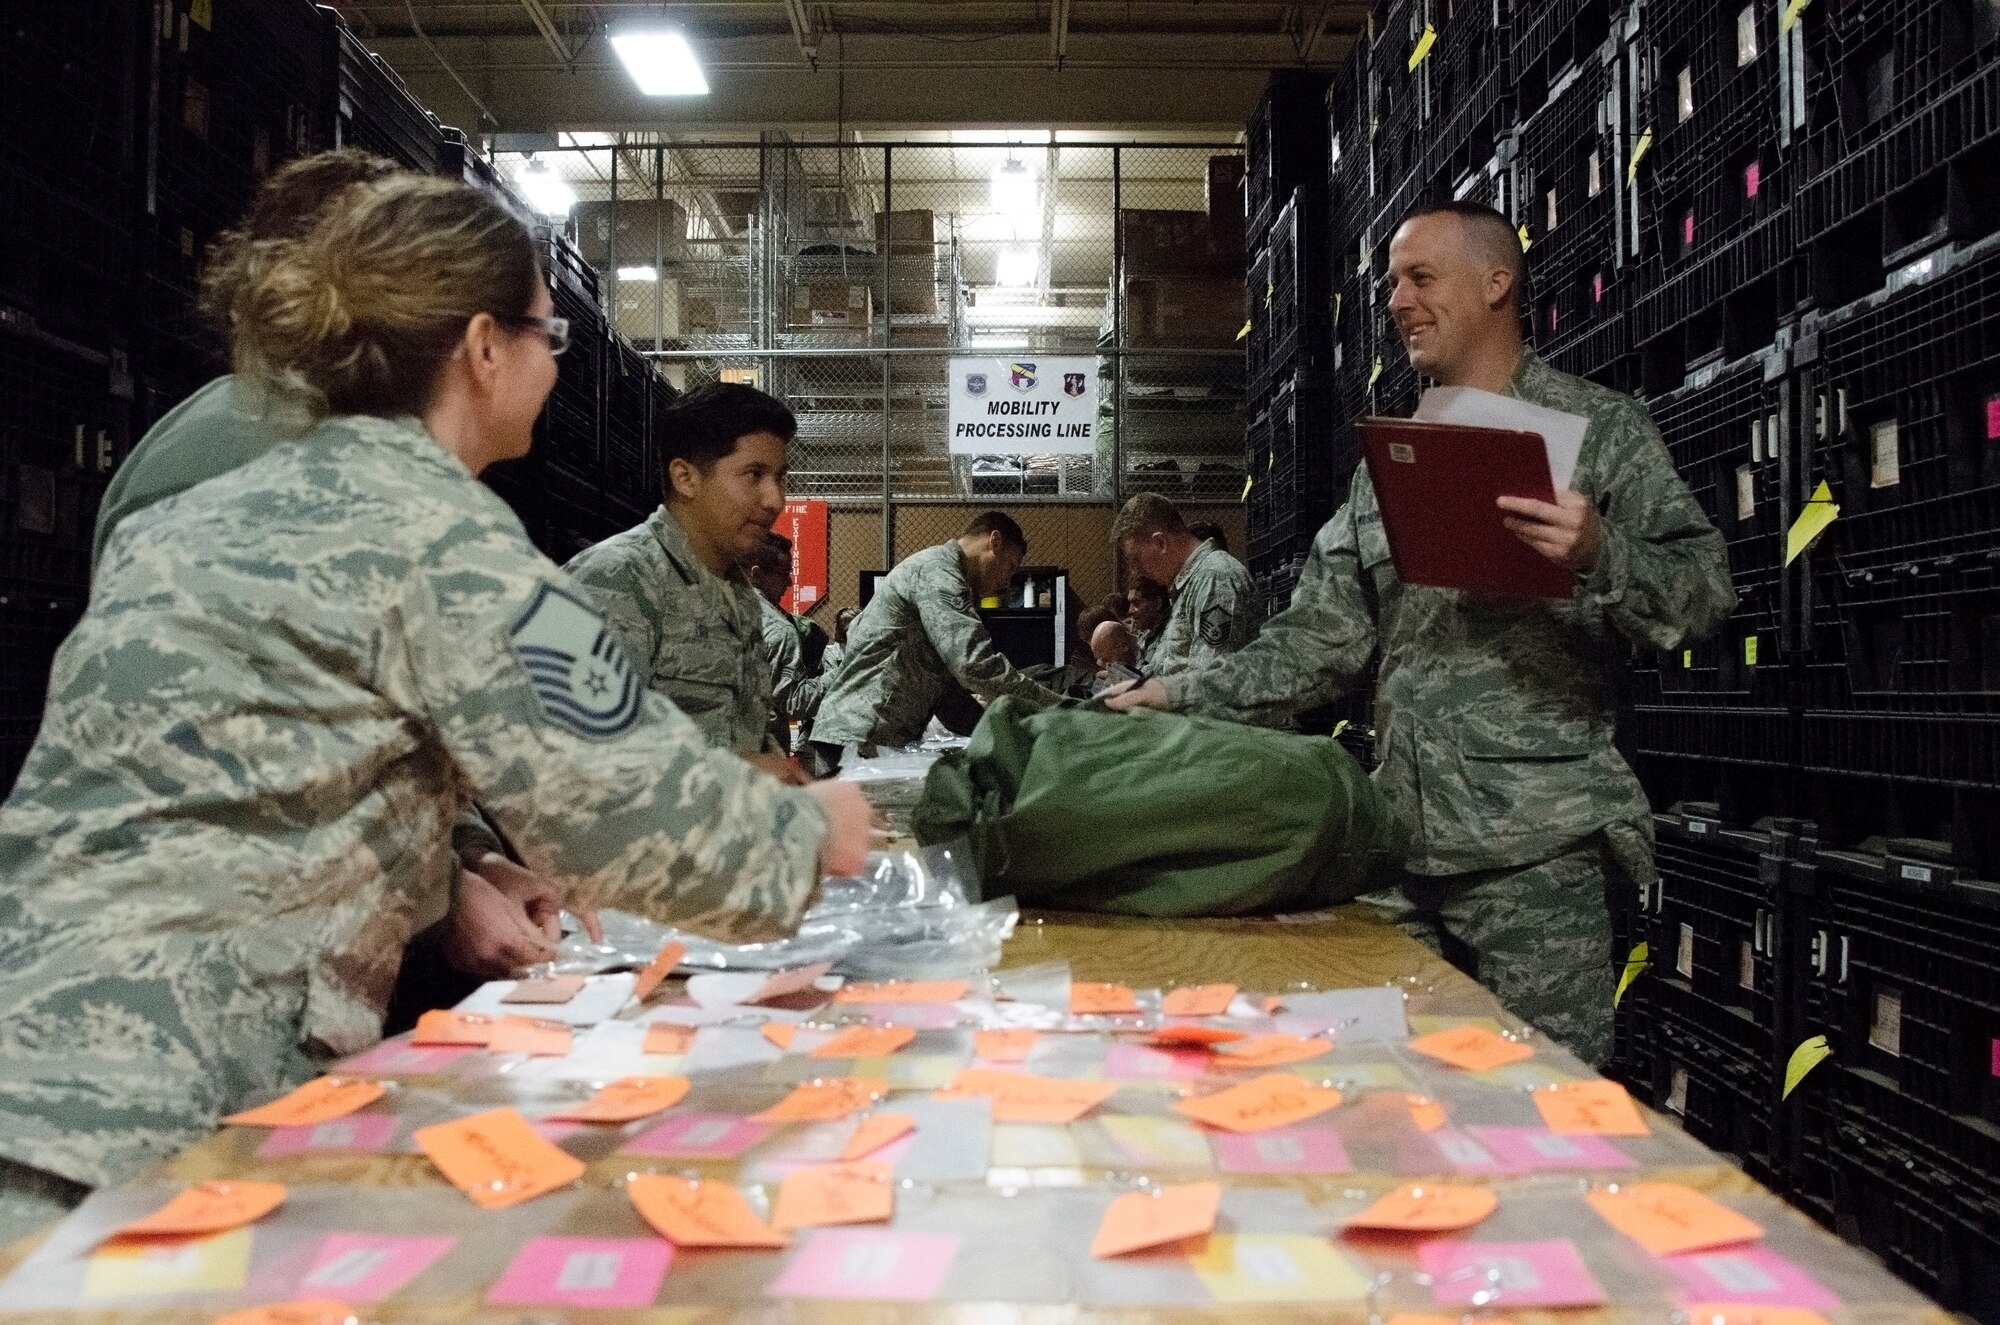 Airmen receive their assigned gear while processing through a deployment mobility line during a generation exercise at the 128th Air Refueling Wing, Wisconsin Air National Guard, Nov. 5, 2017.